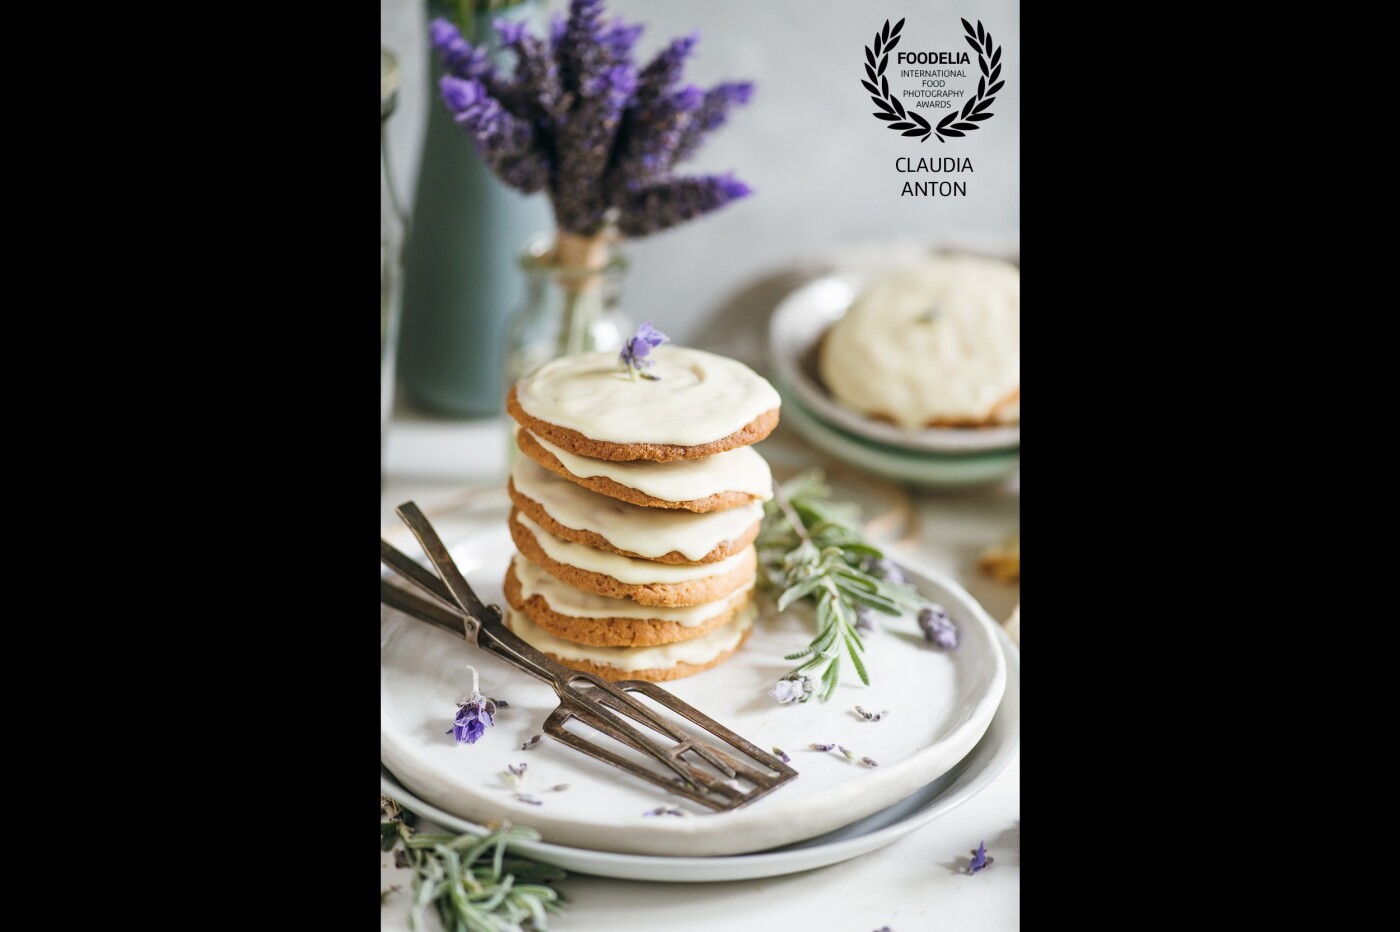 This stack of lavender Venetian biscuits has a little old-world charm inspired by the muted lilac and dusky green shades of the lavender bushes in my garden. A little bright spring scene - and might I add the biscuits are yummy to boot (the stack was taller before the photo!)